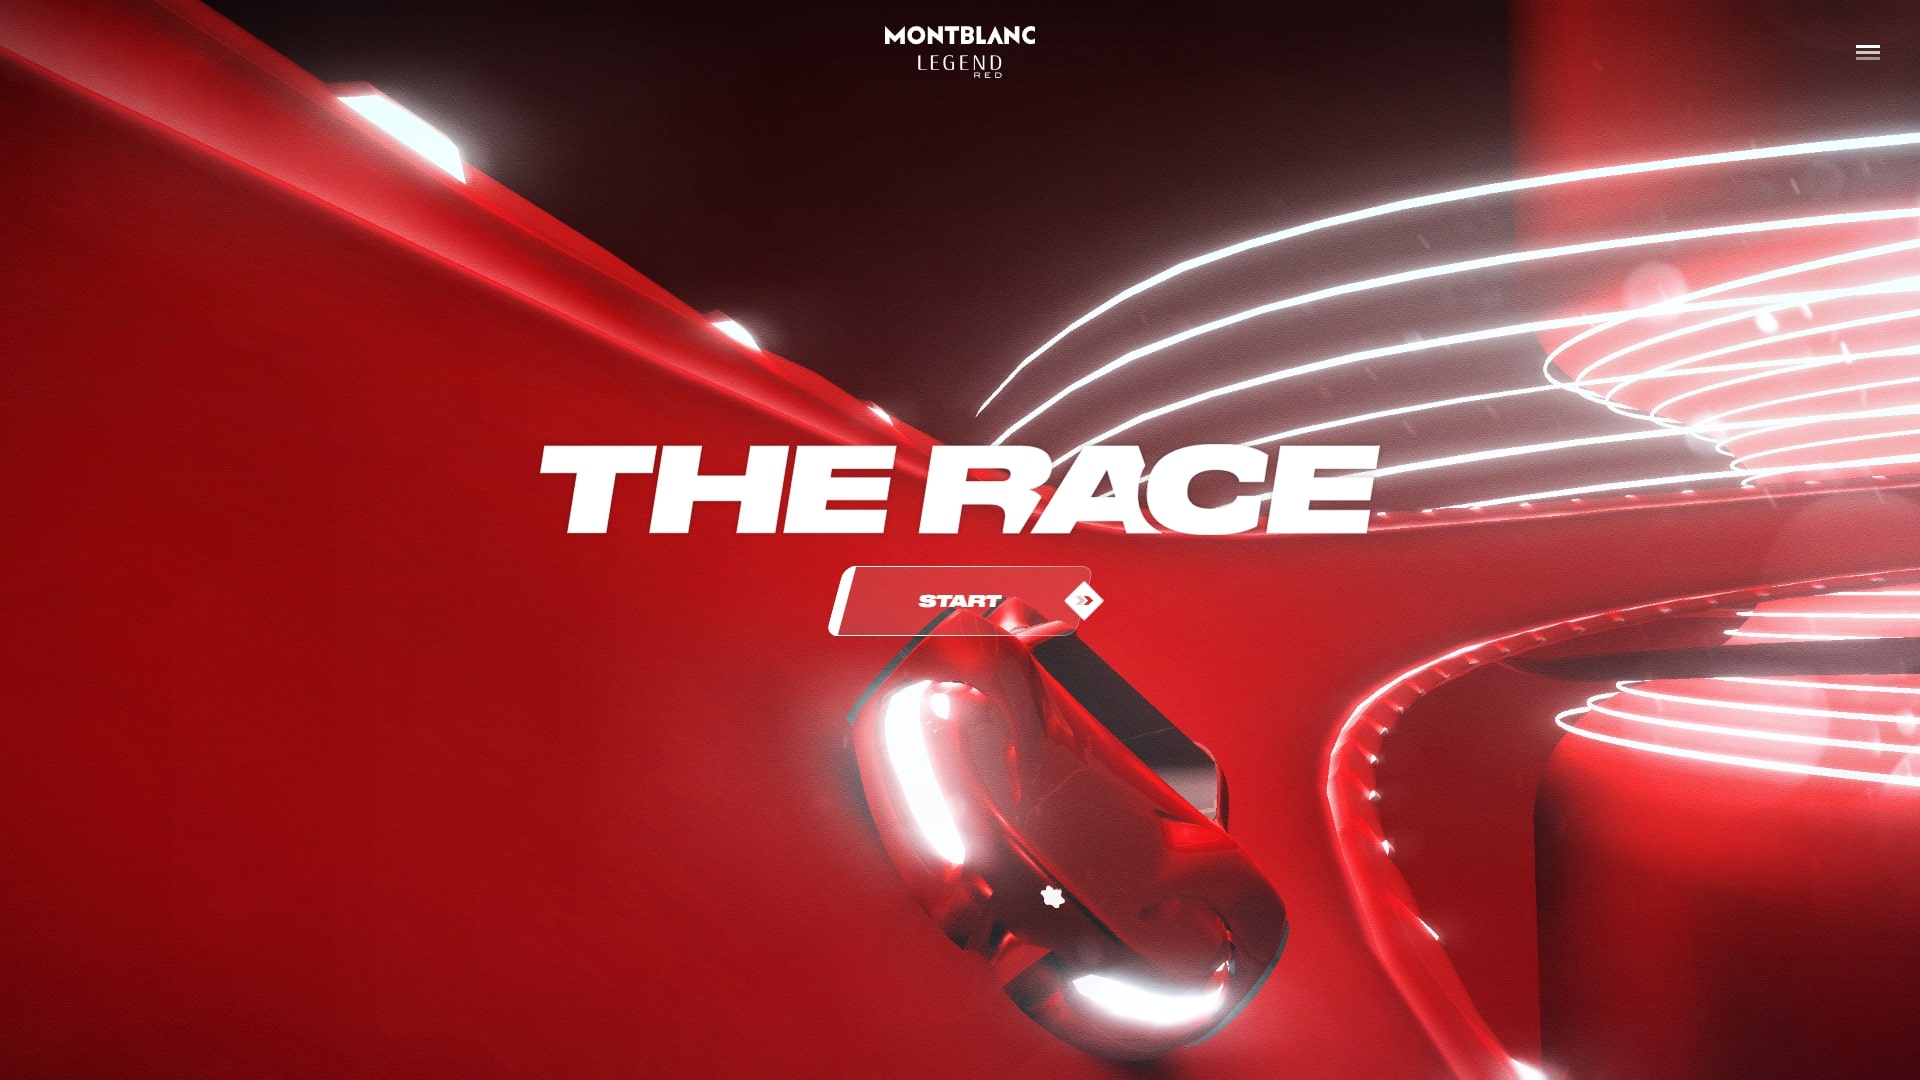 The race – interparfums games & entertainment animation